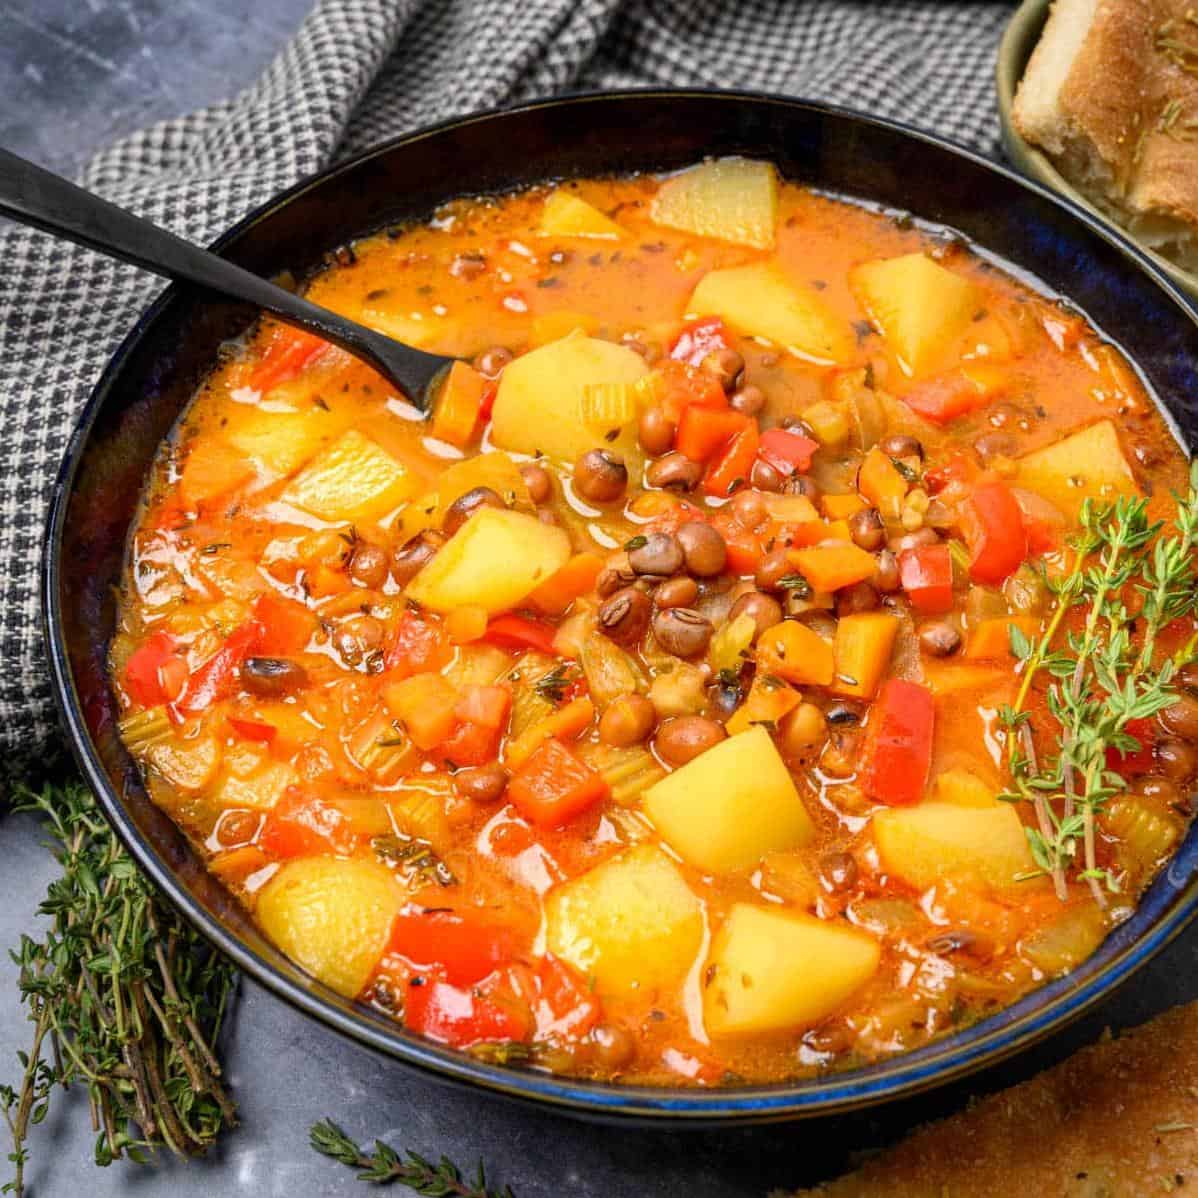  Vegan Jamaican-style stew: a gluten-free, oil-free, and delicious way to enjoy a plant-based meal.